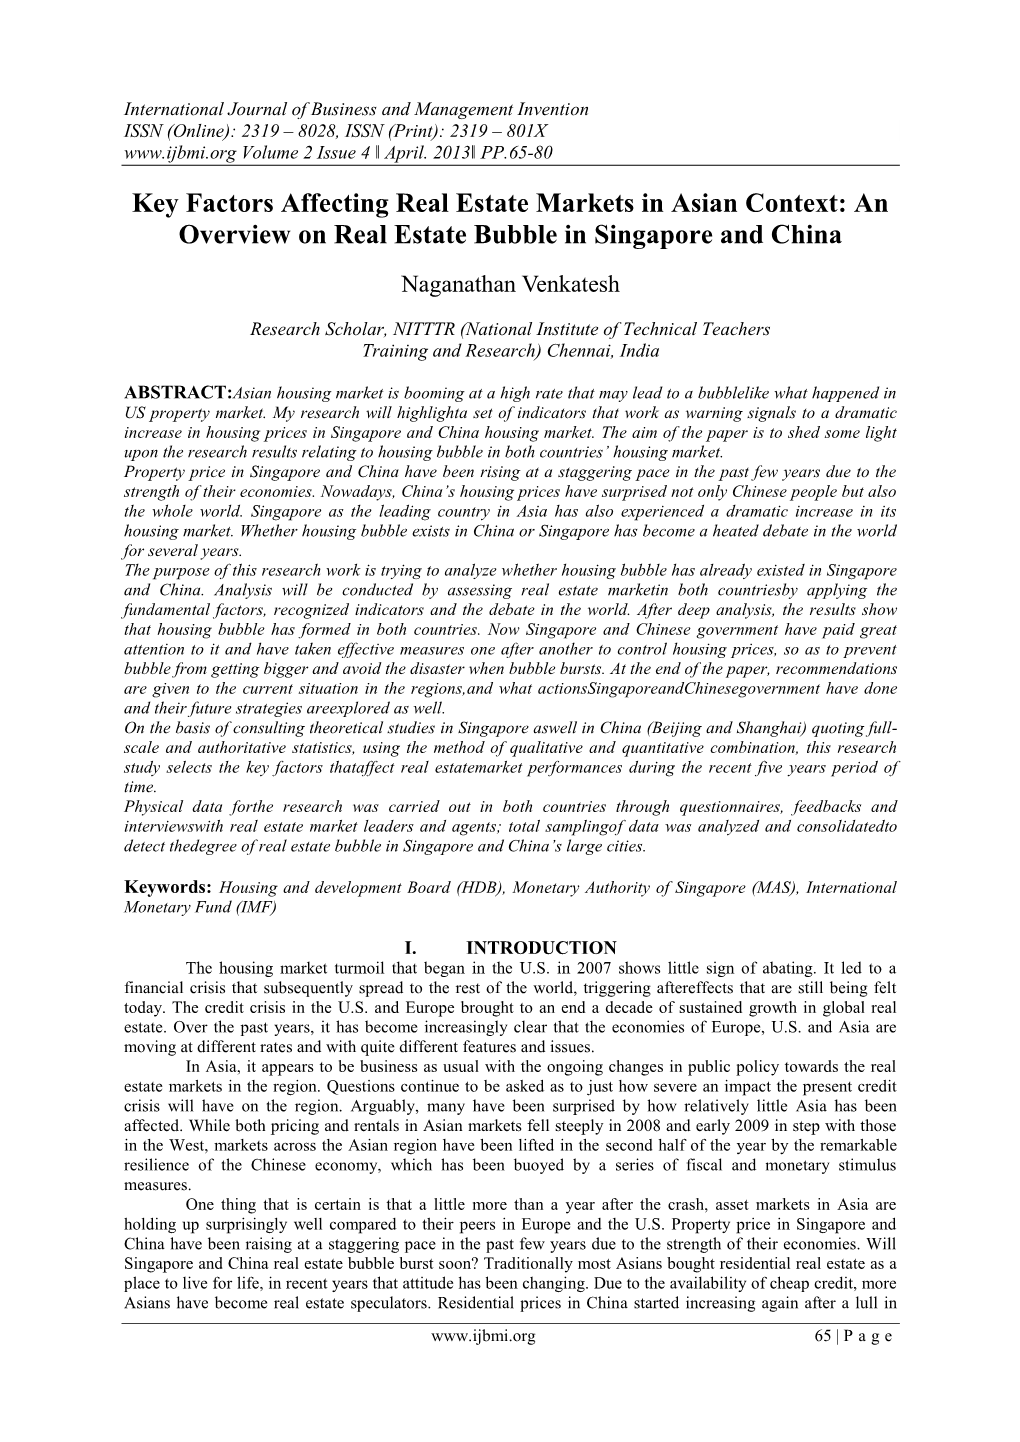 Key Factors Affecting Real Estate Markets in Asian Context: an Overview on Real Estate Bubble in Singapore and China Naganathan Venkatesh